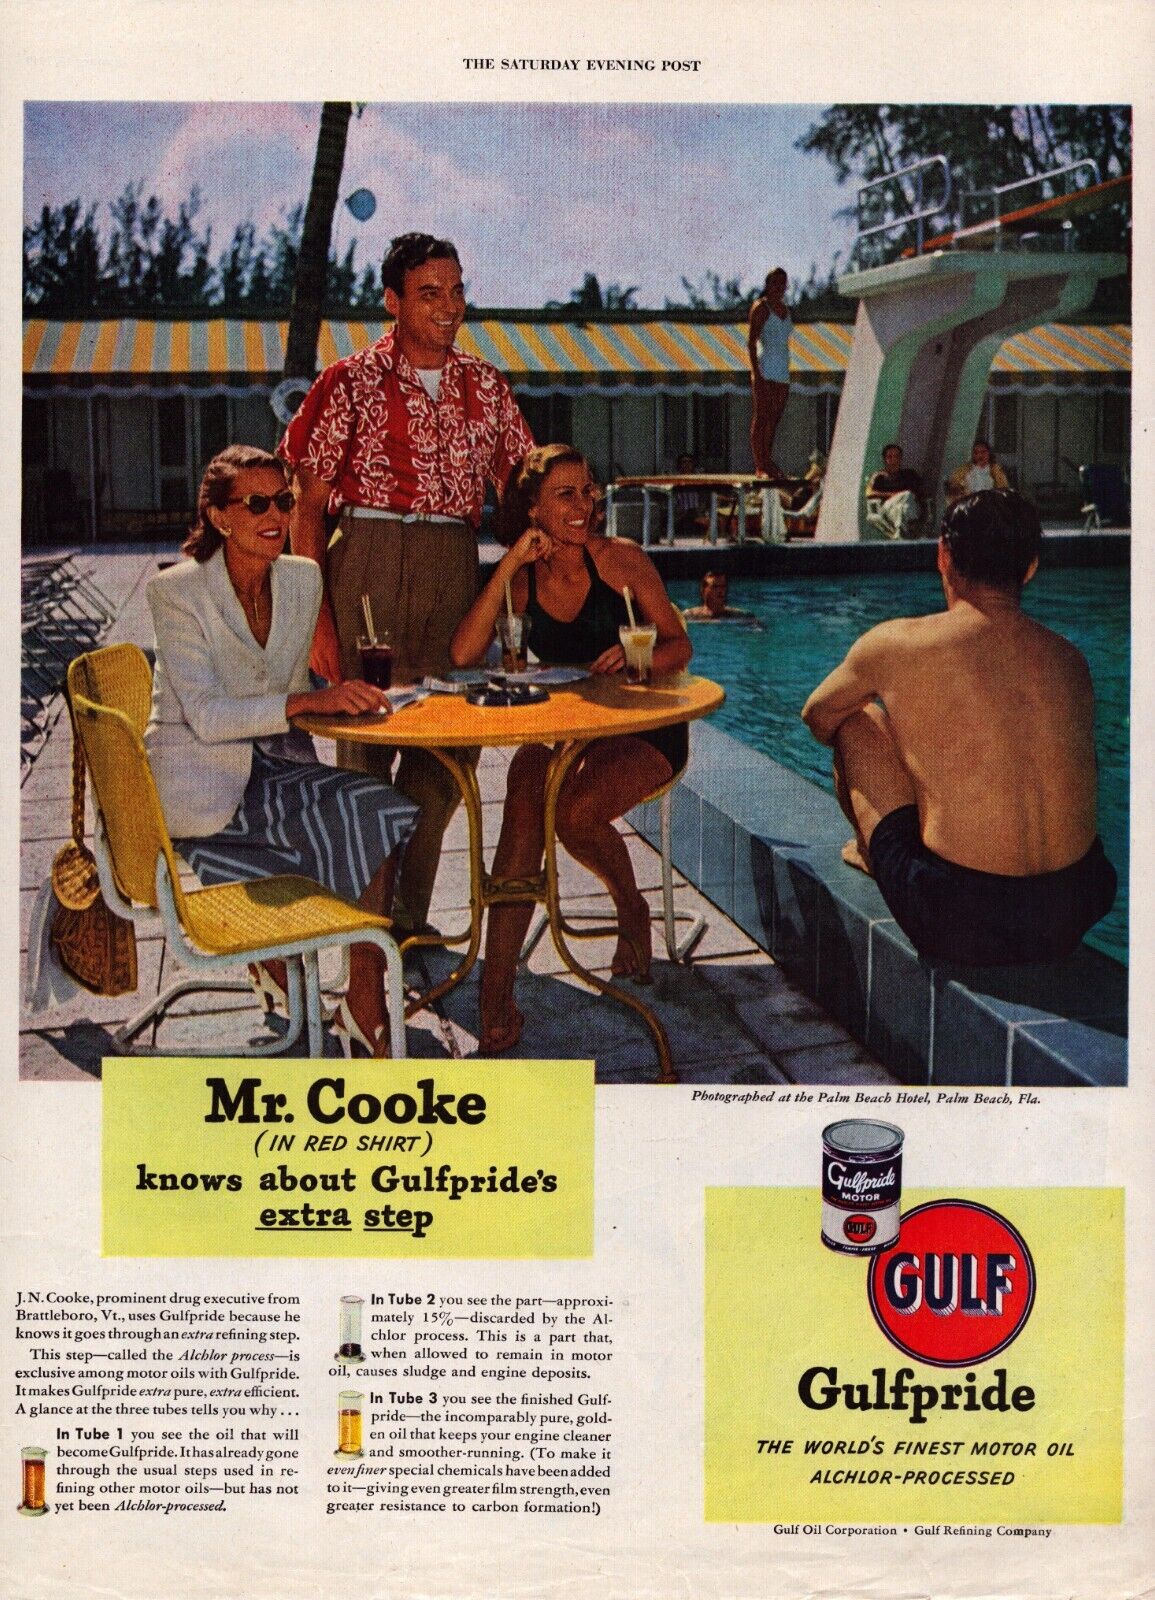 1949 Gulf Oil Corp Poolside Swimming J.N Cooke Sat Evening Post Vintage Print Ad